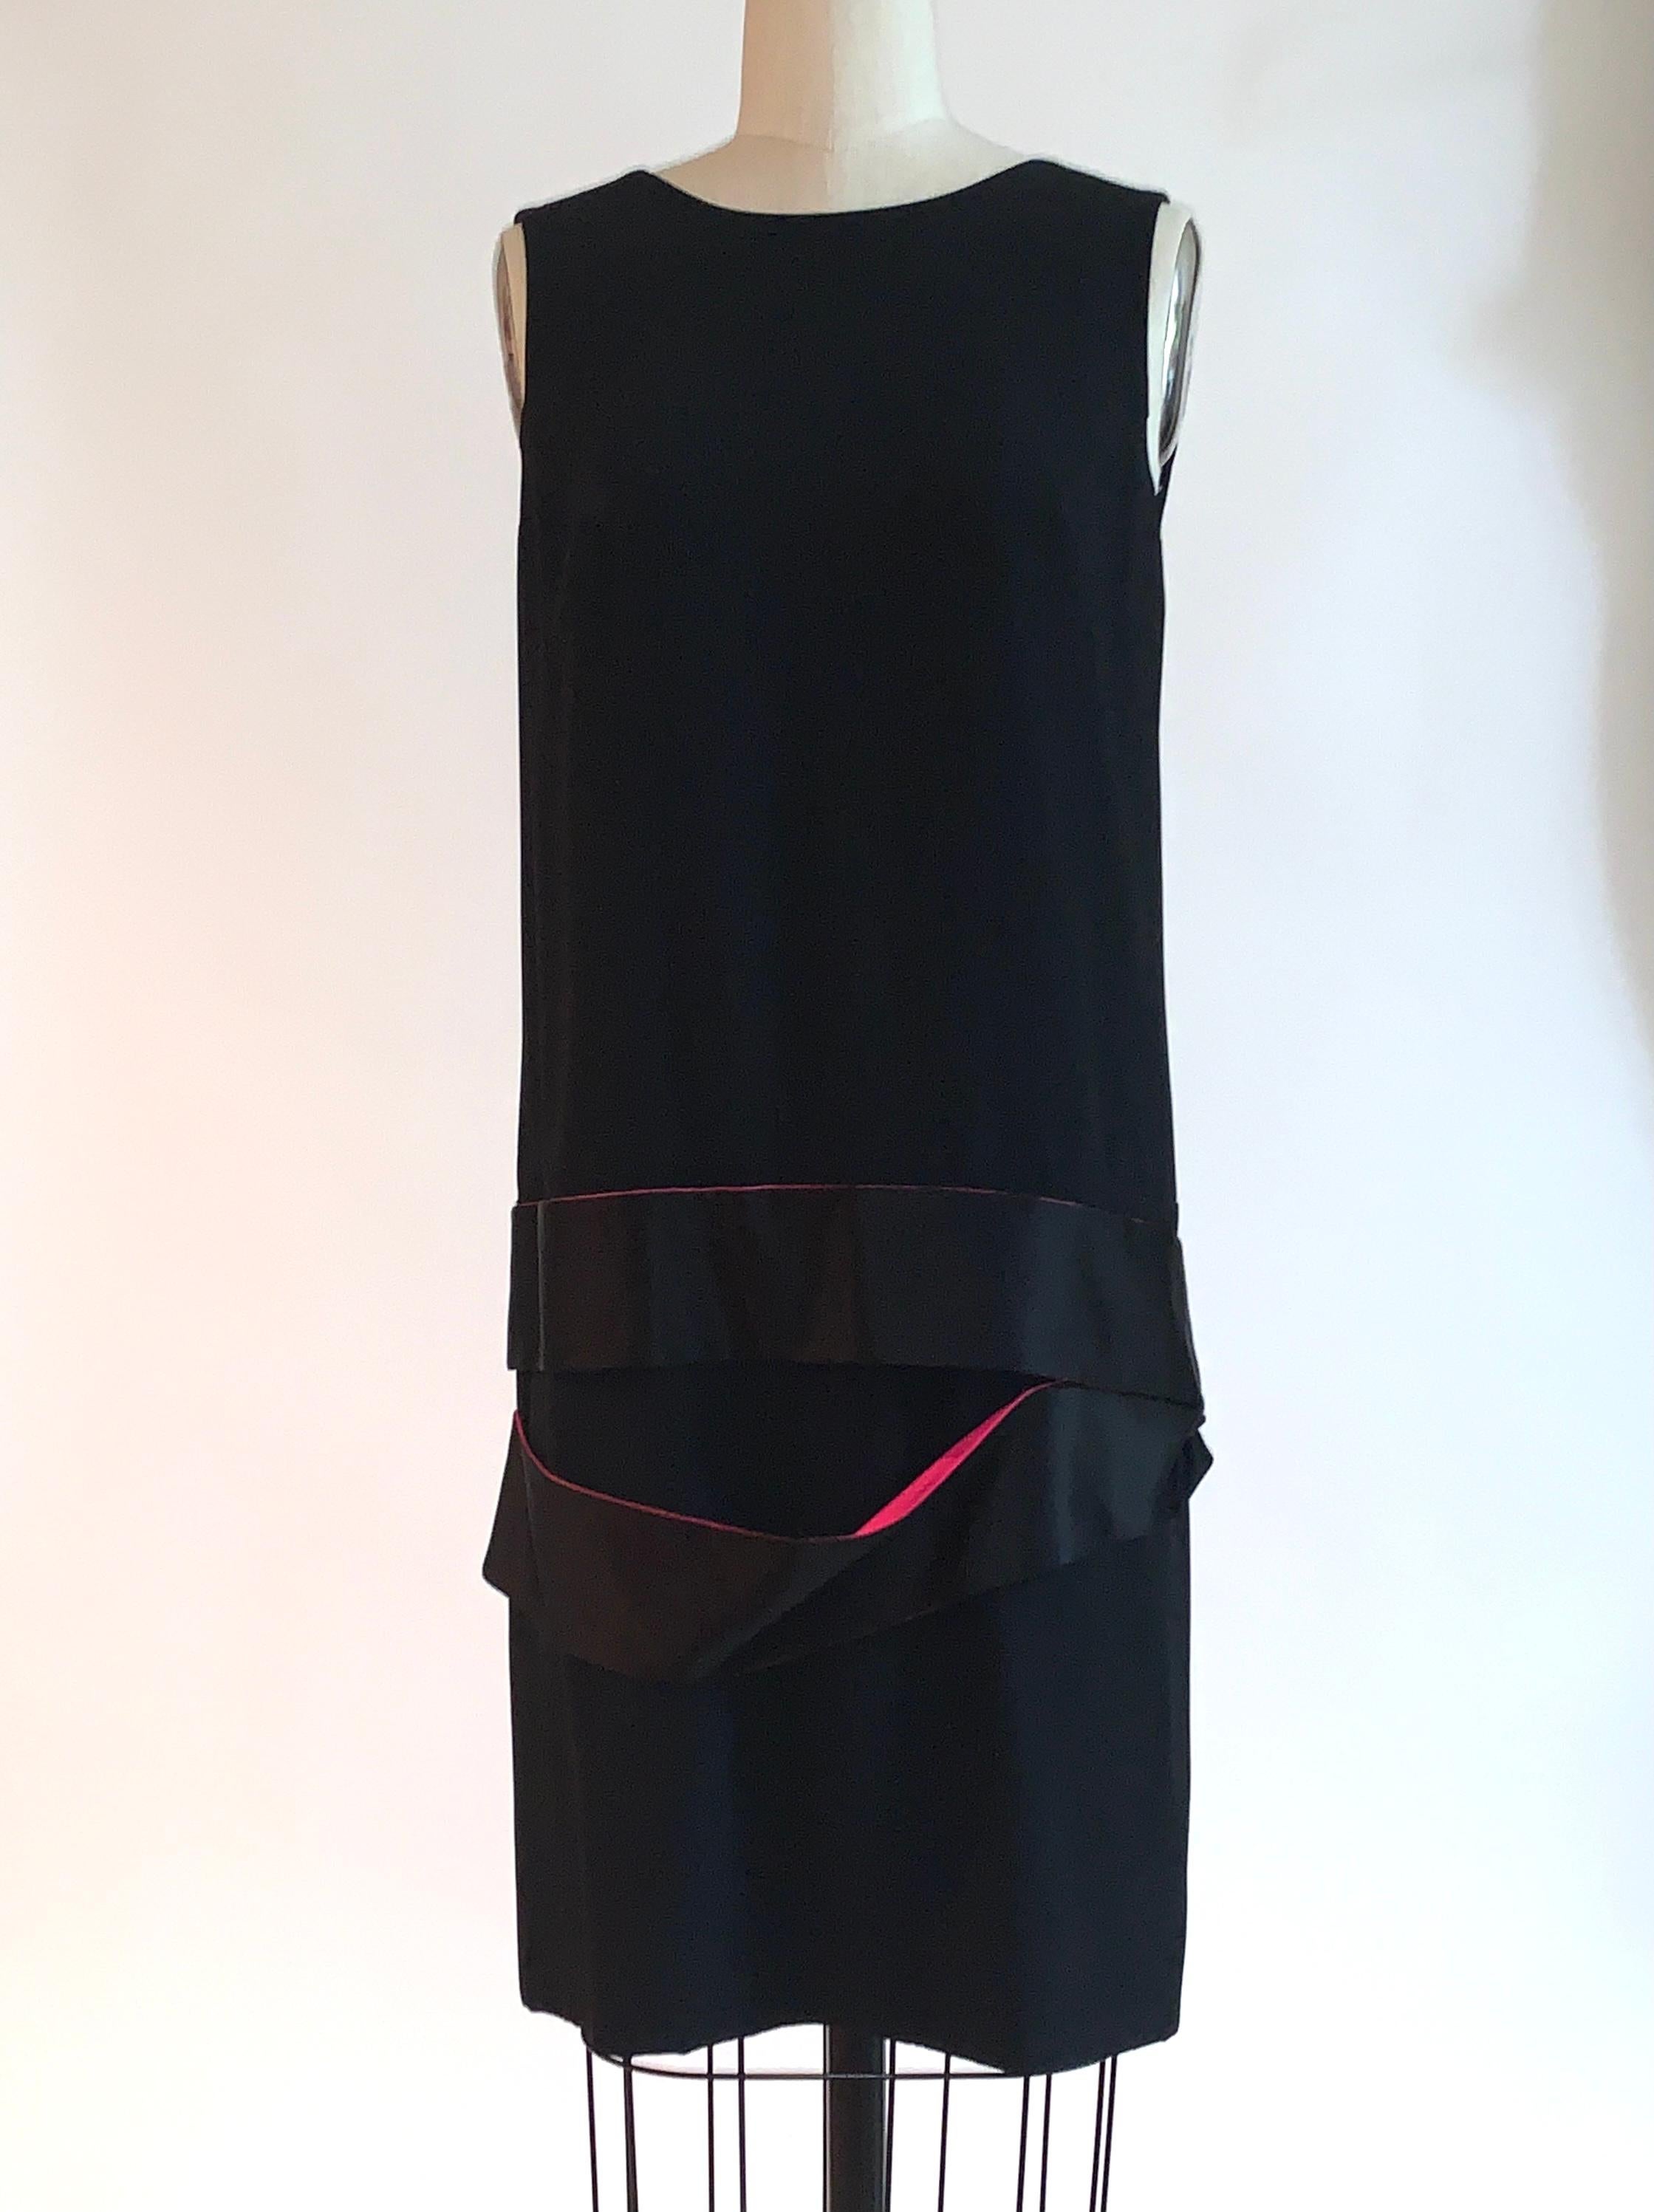 Alexander McQueen black sleeveless drop waist dress with deep v back and black and pink silk bands at dropped waist. From the 2008 collection created as a tribute to McQueen's mentor Isabella Blow. Back zip and hook and eye. 

48% acetate, 48%